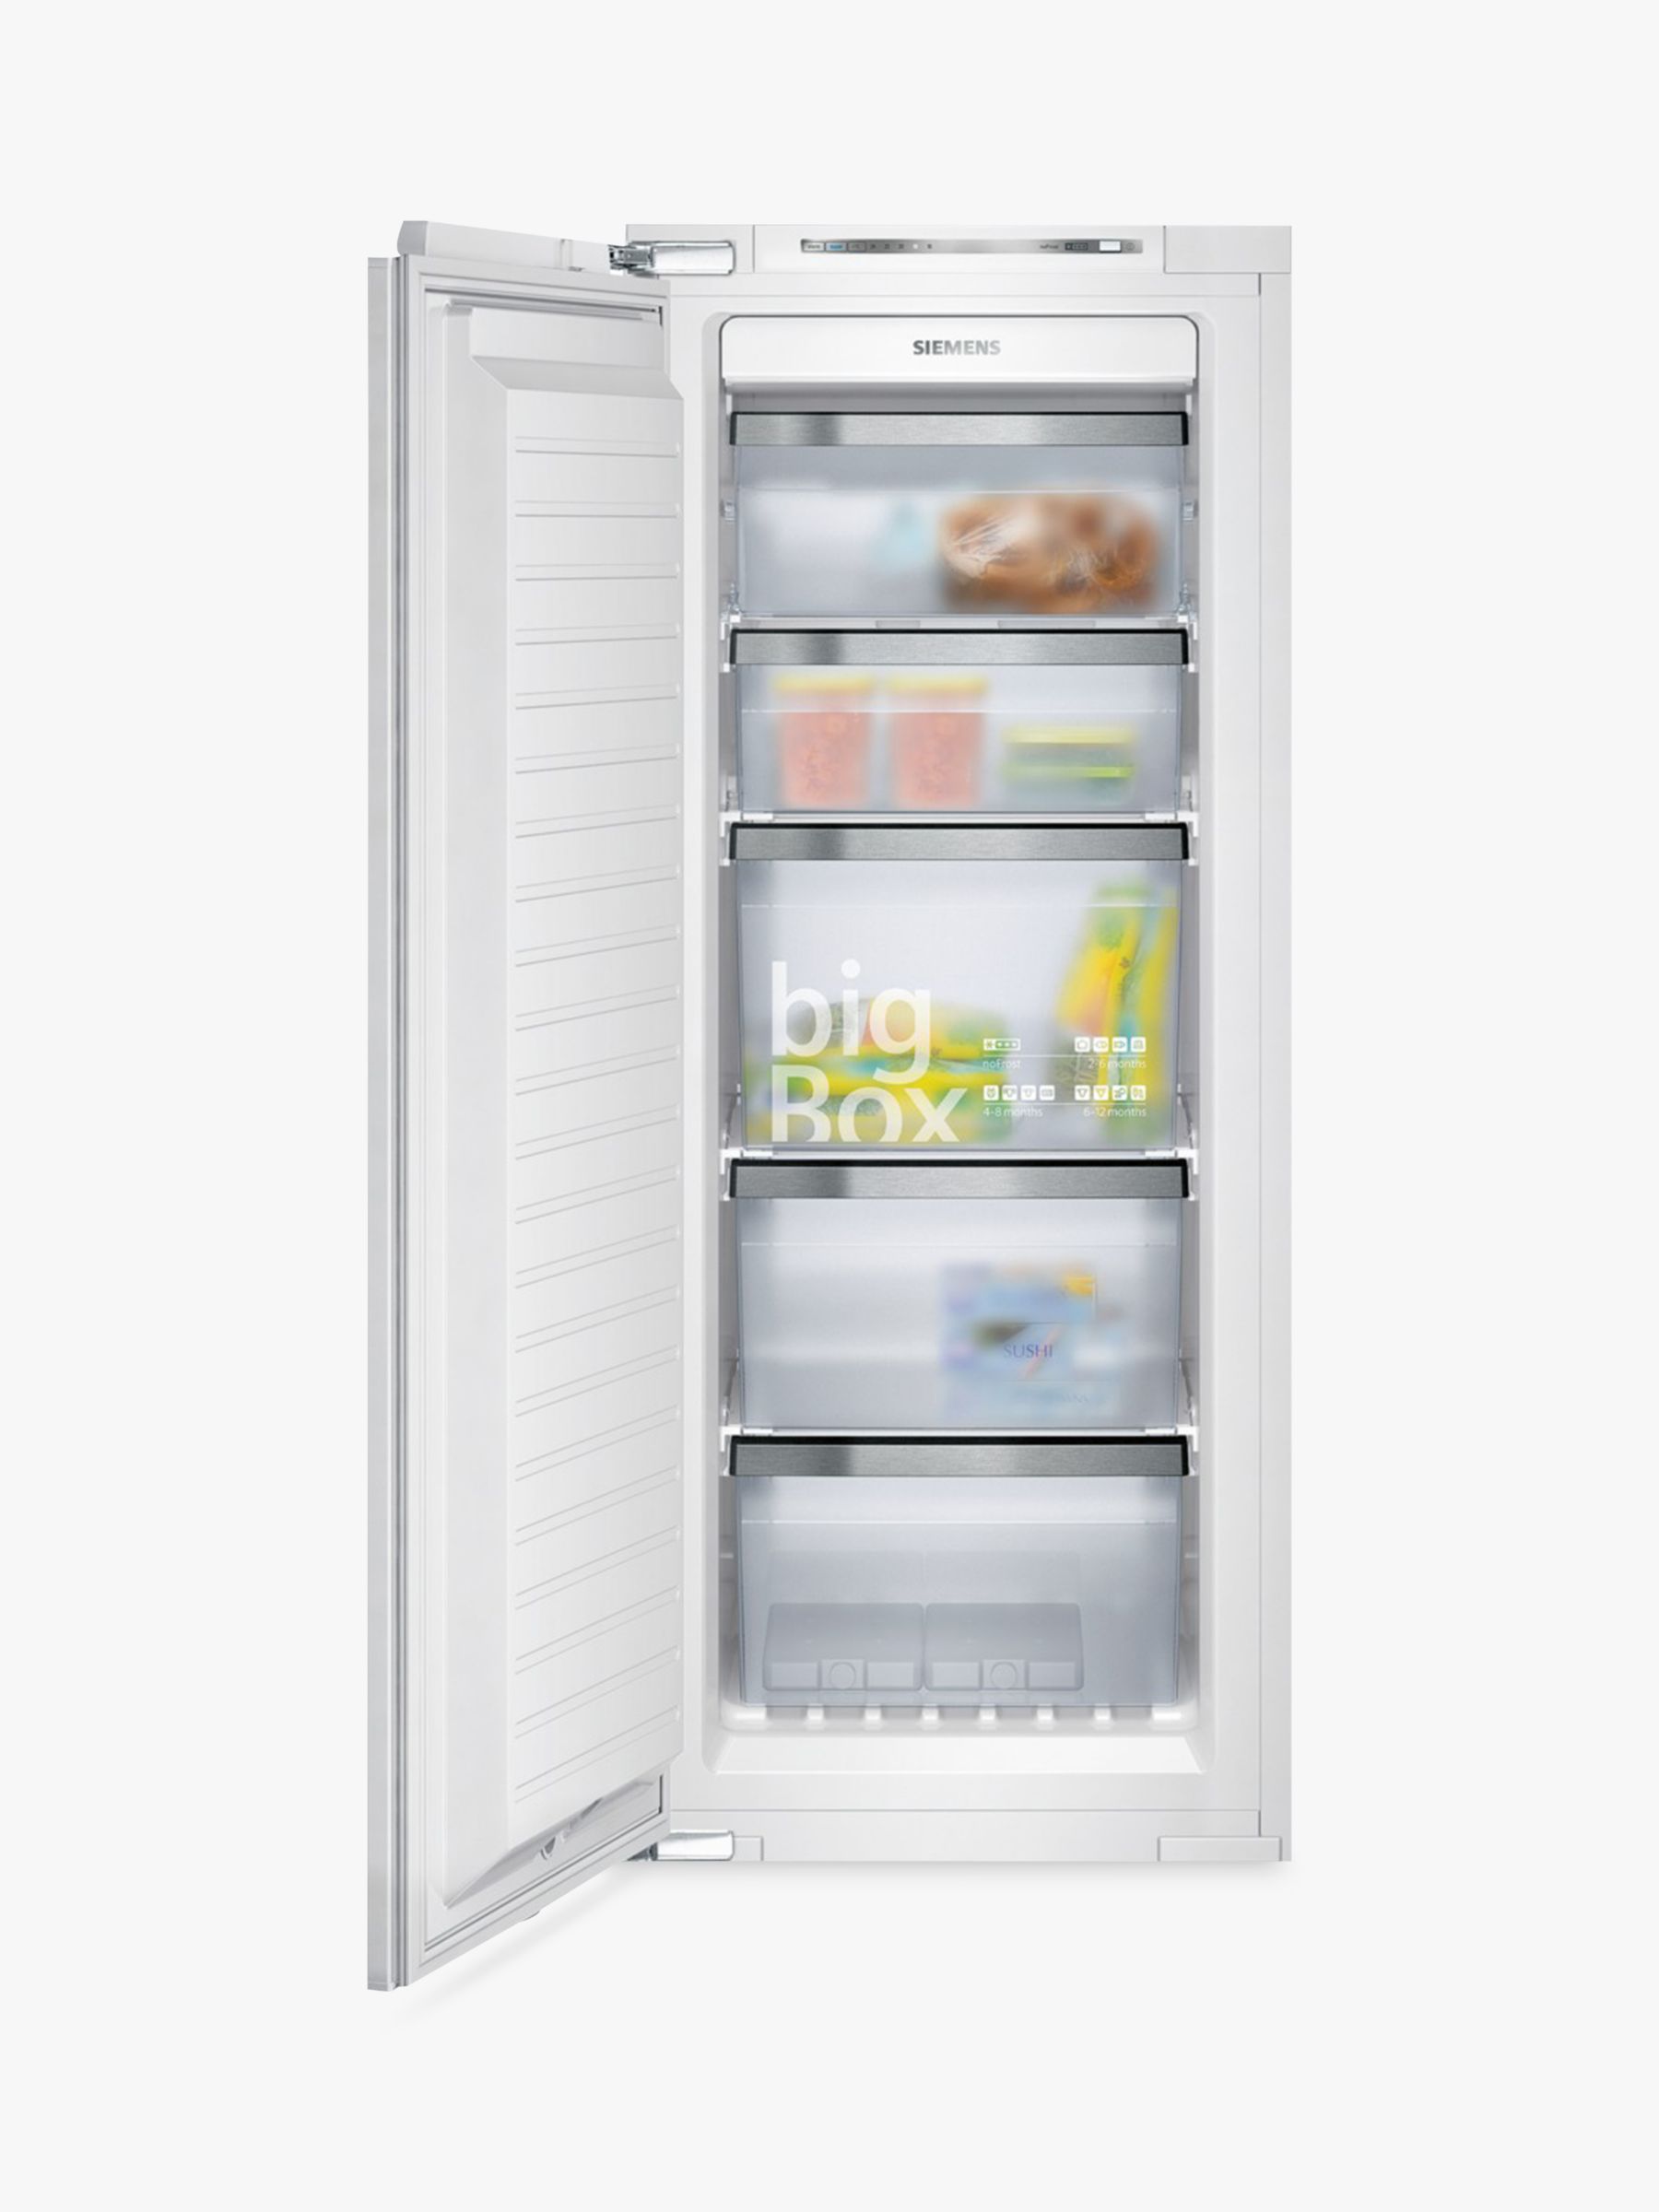 Siemens GI25NP60 Integrated Freezer, A++ Energy Rating, 56cm Wide